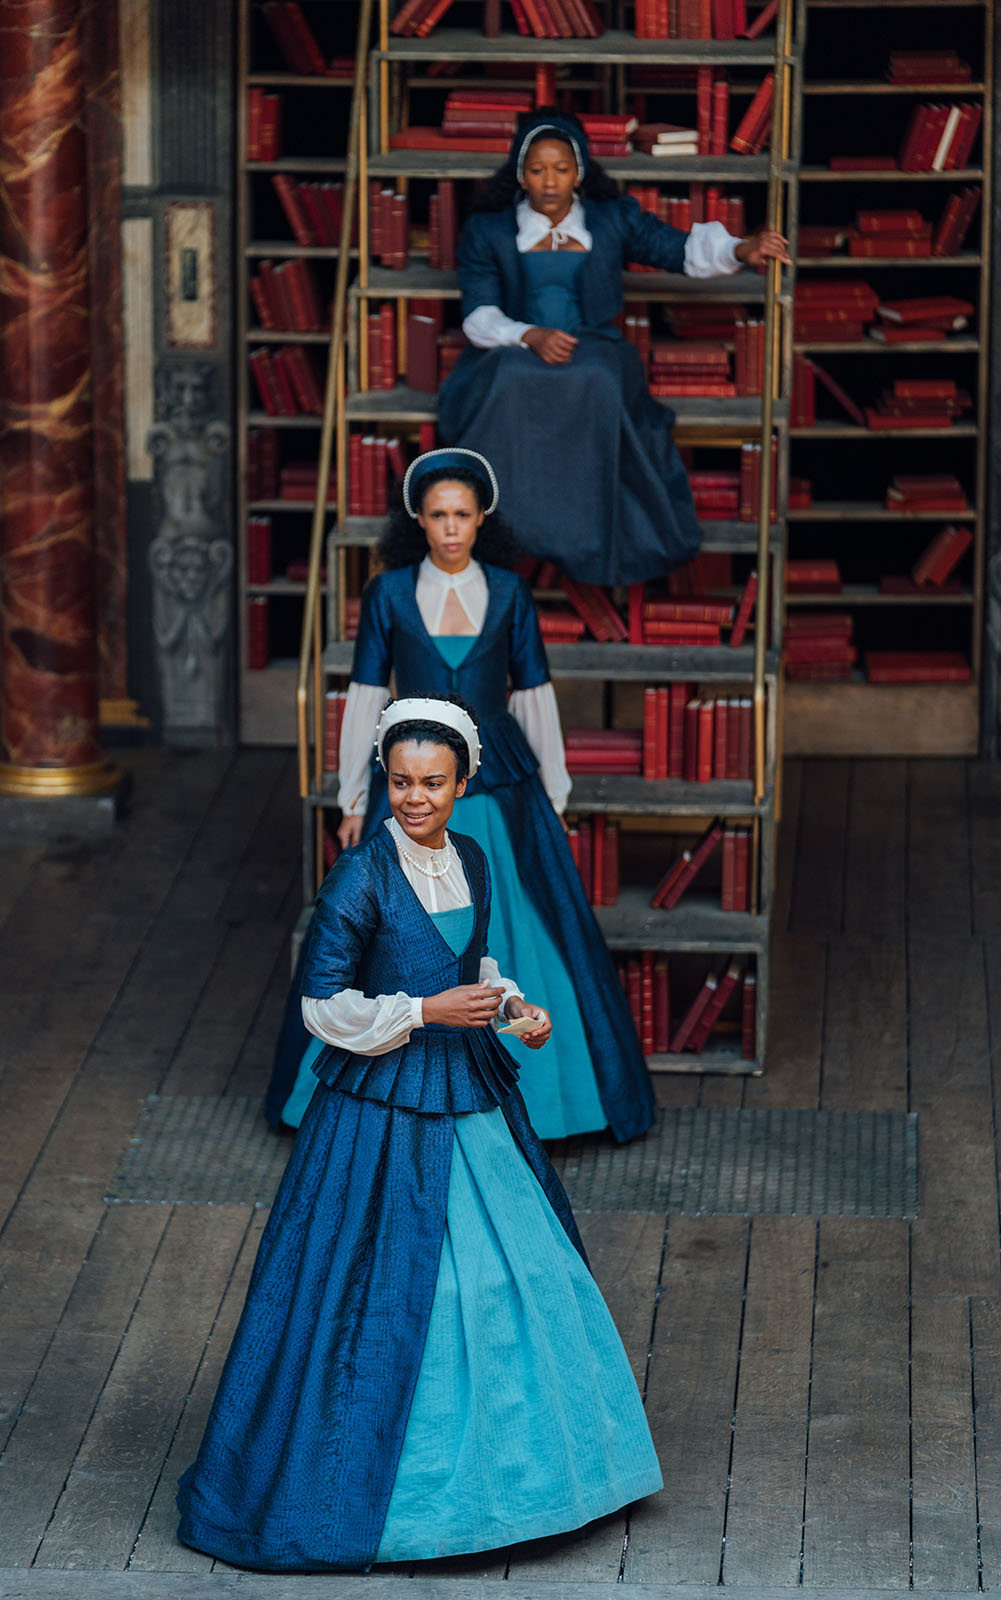 Three actors wearing blue Elizabethan corset gowns line up behind each other on the wooden floorboards of the Globe Theatre stage. The actor to the font holds their hands at their waist, smiling. The second actor stands directly behind, whist the third sits o a ladder staircase filled with red bound books.